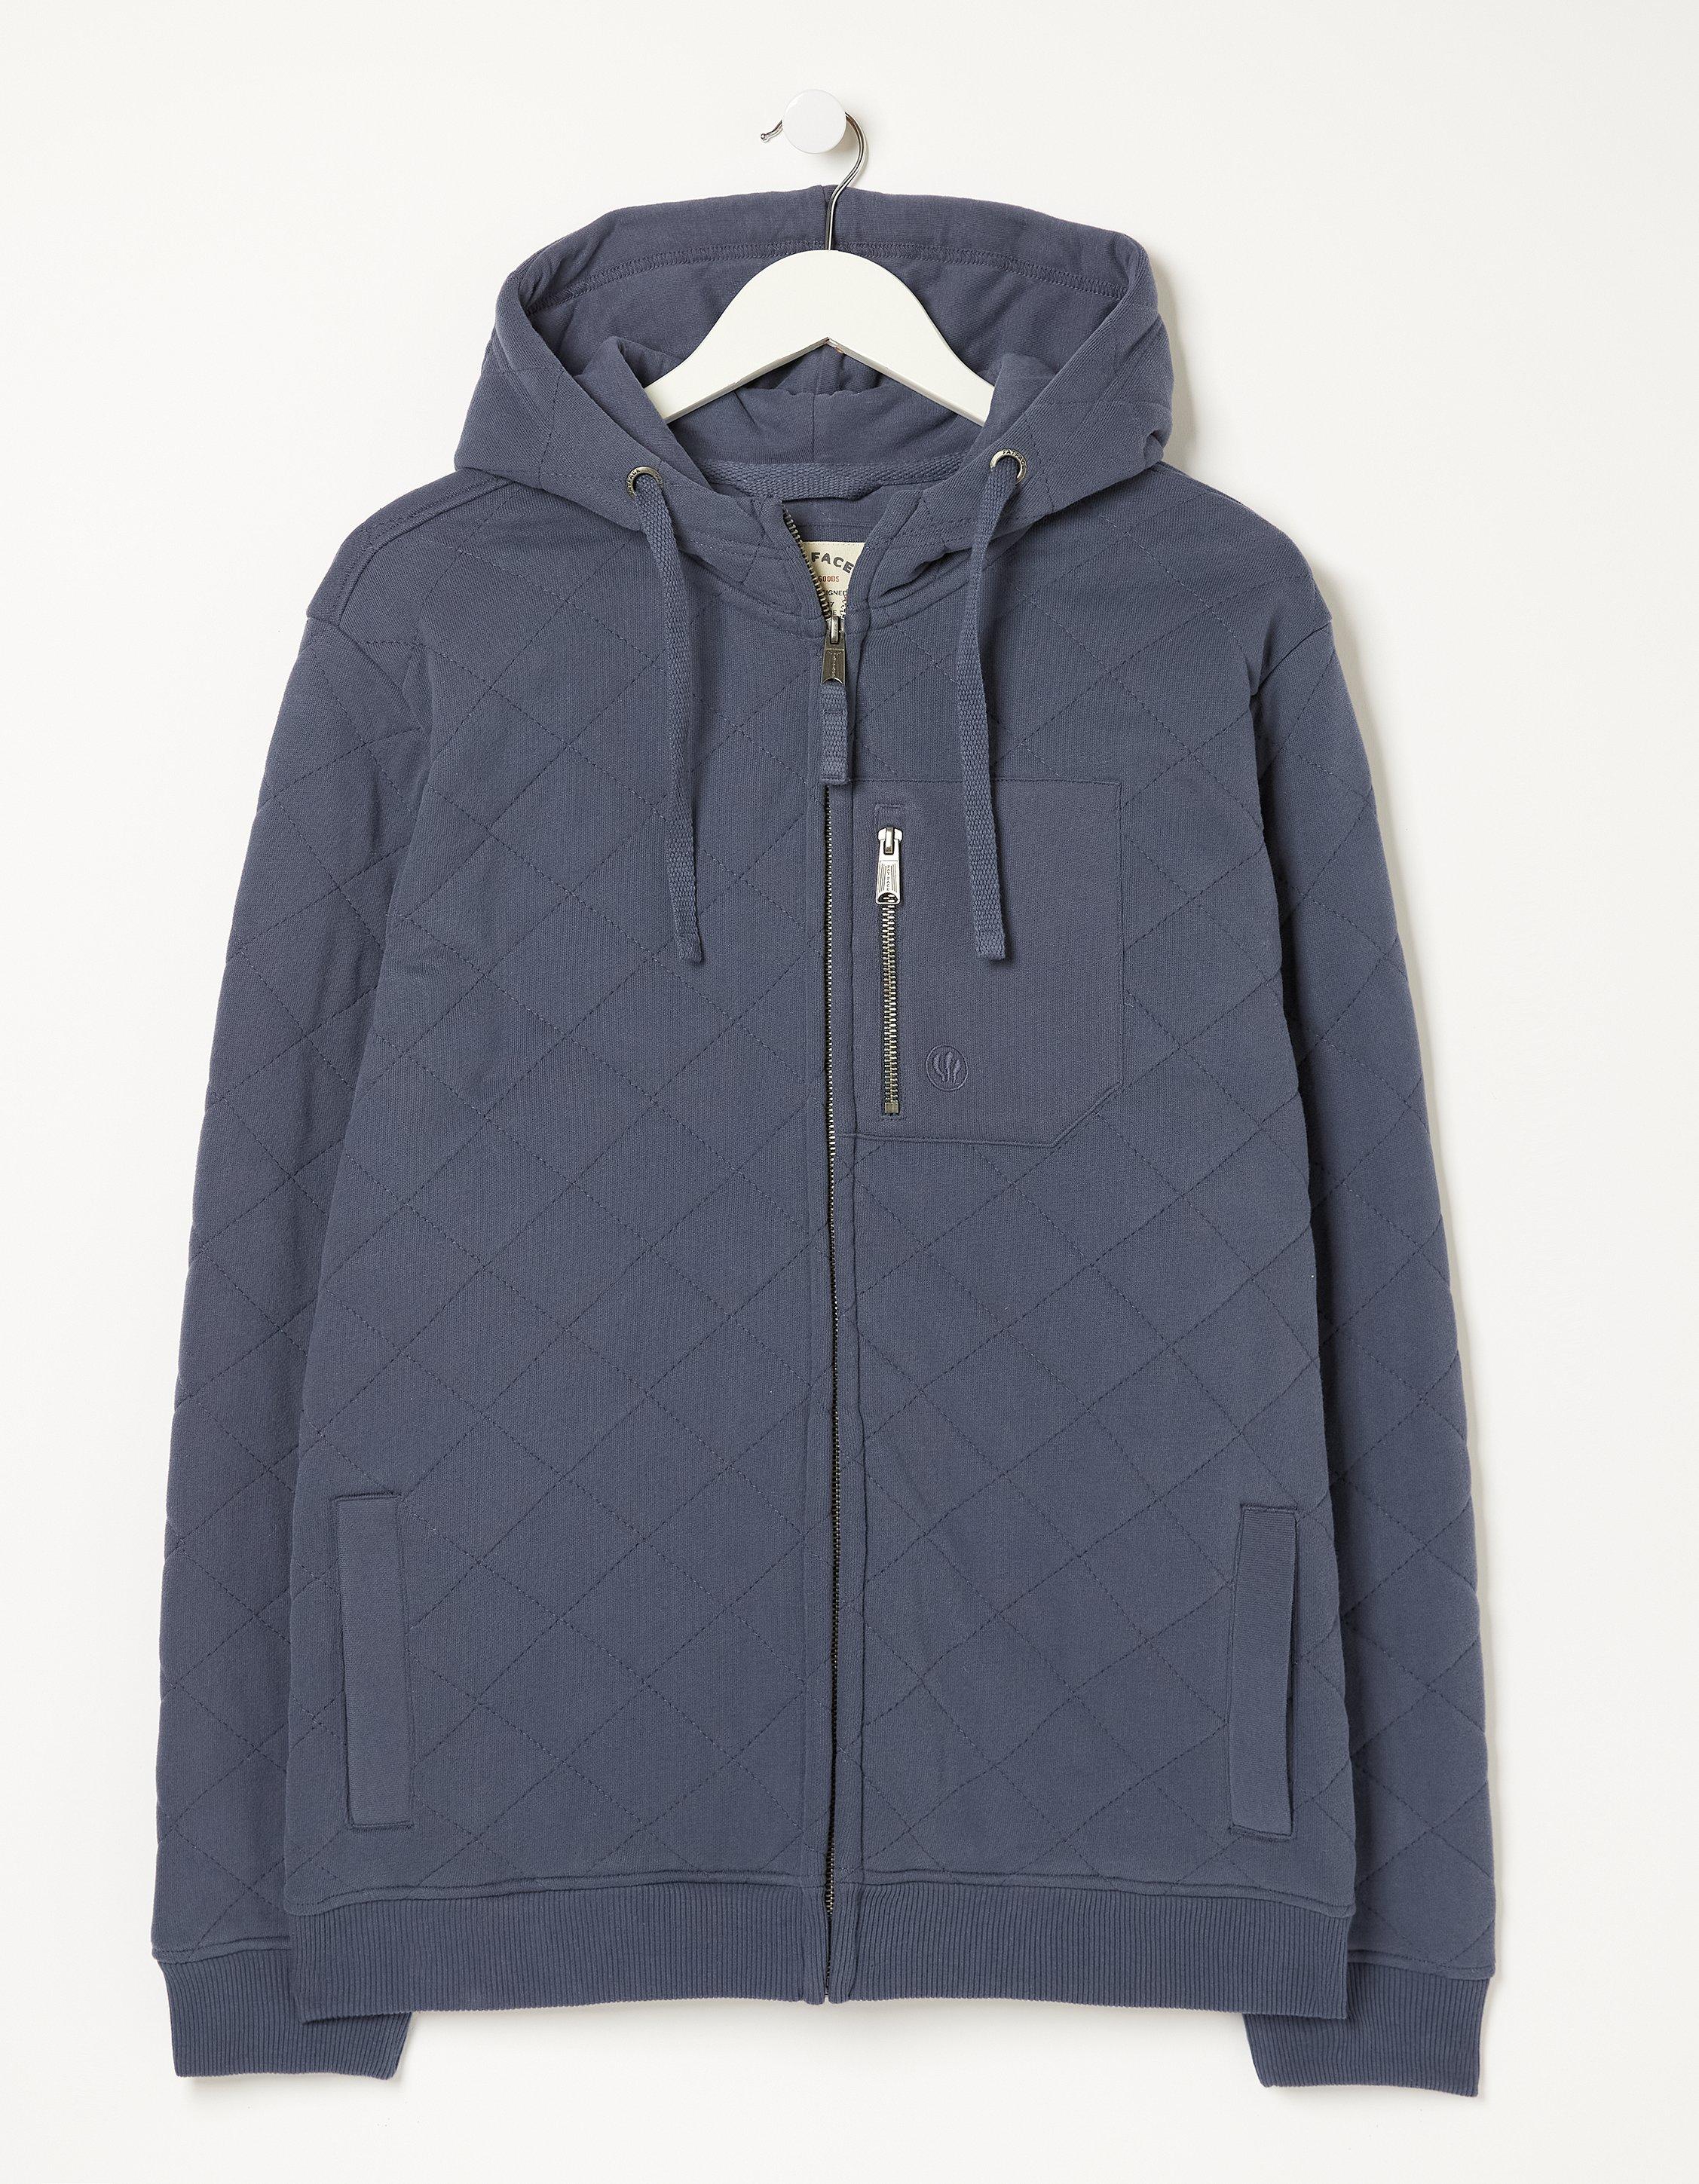 Quilted Zip-Up Hoodie - Men - OBSOLETES DO NOT TOUCH